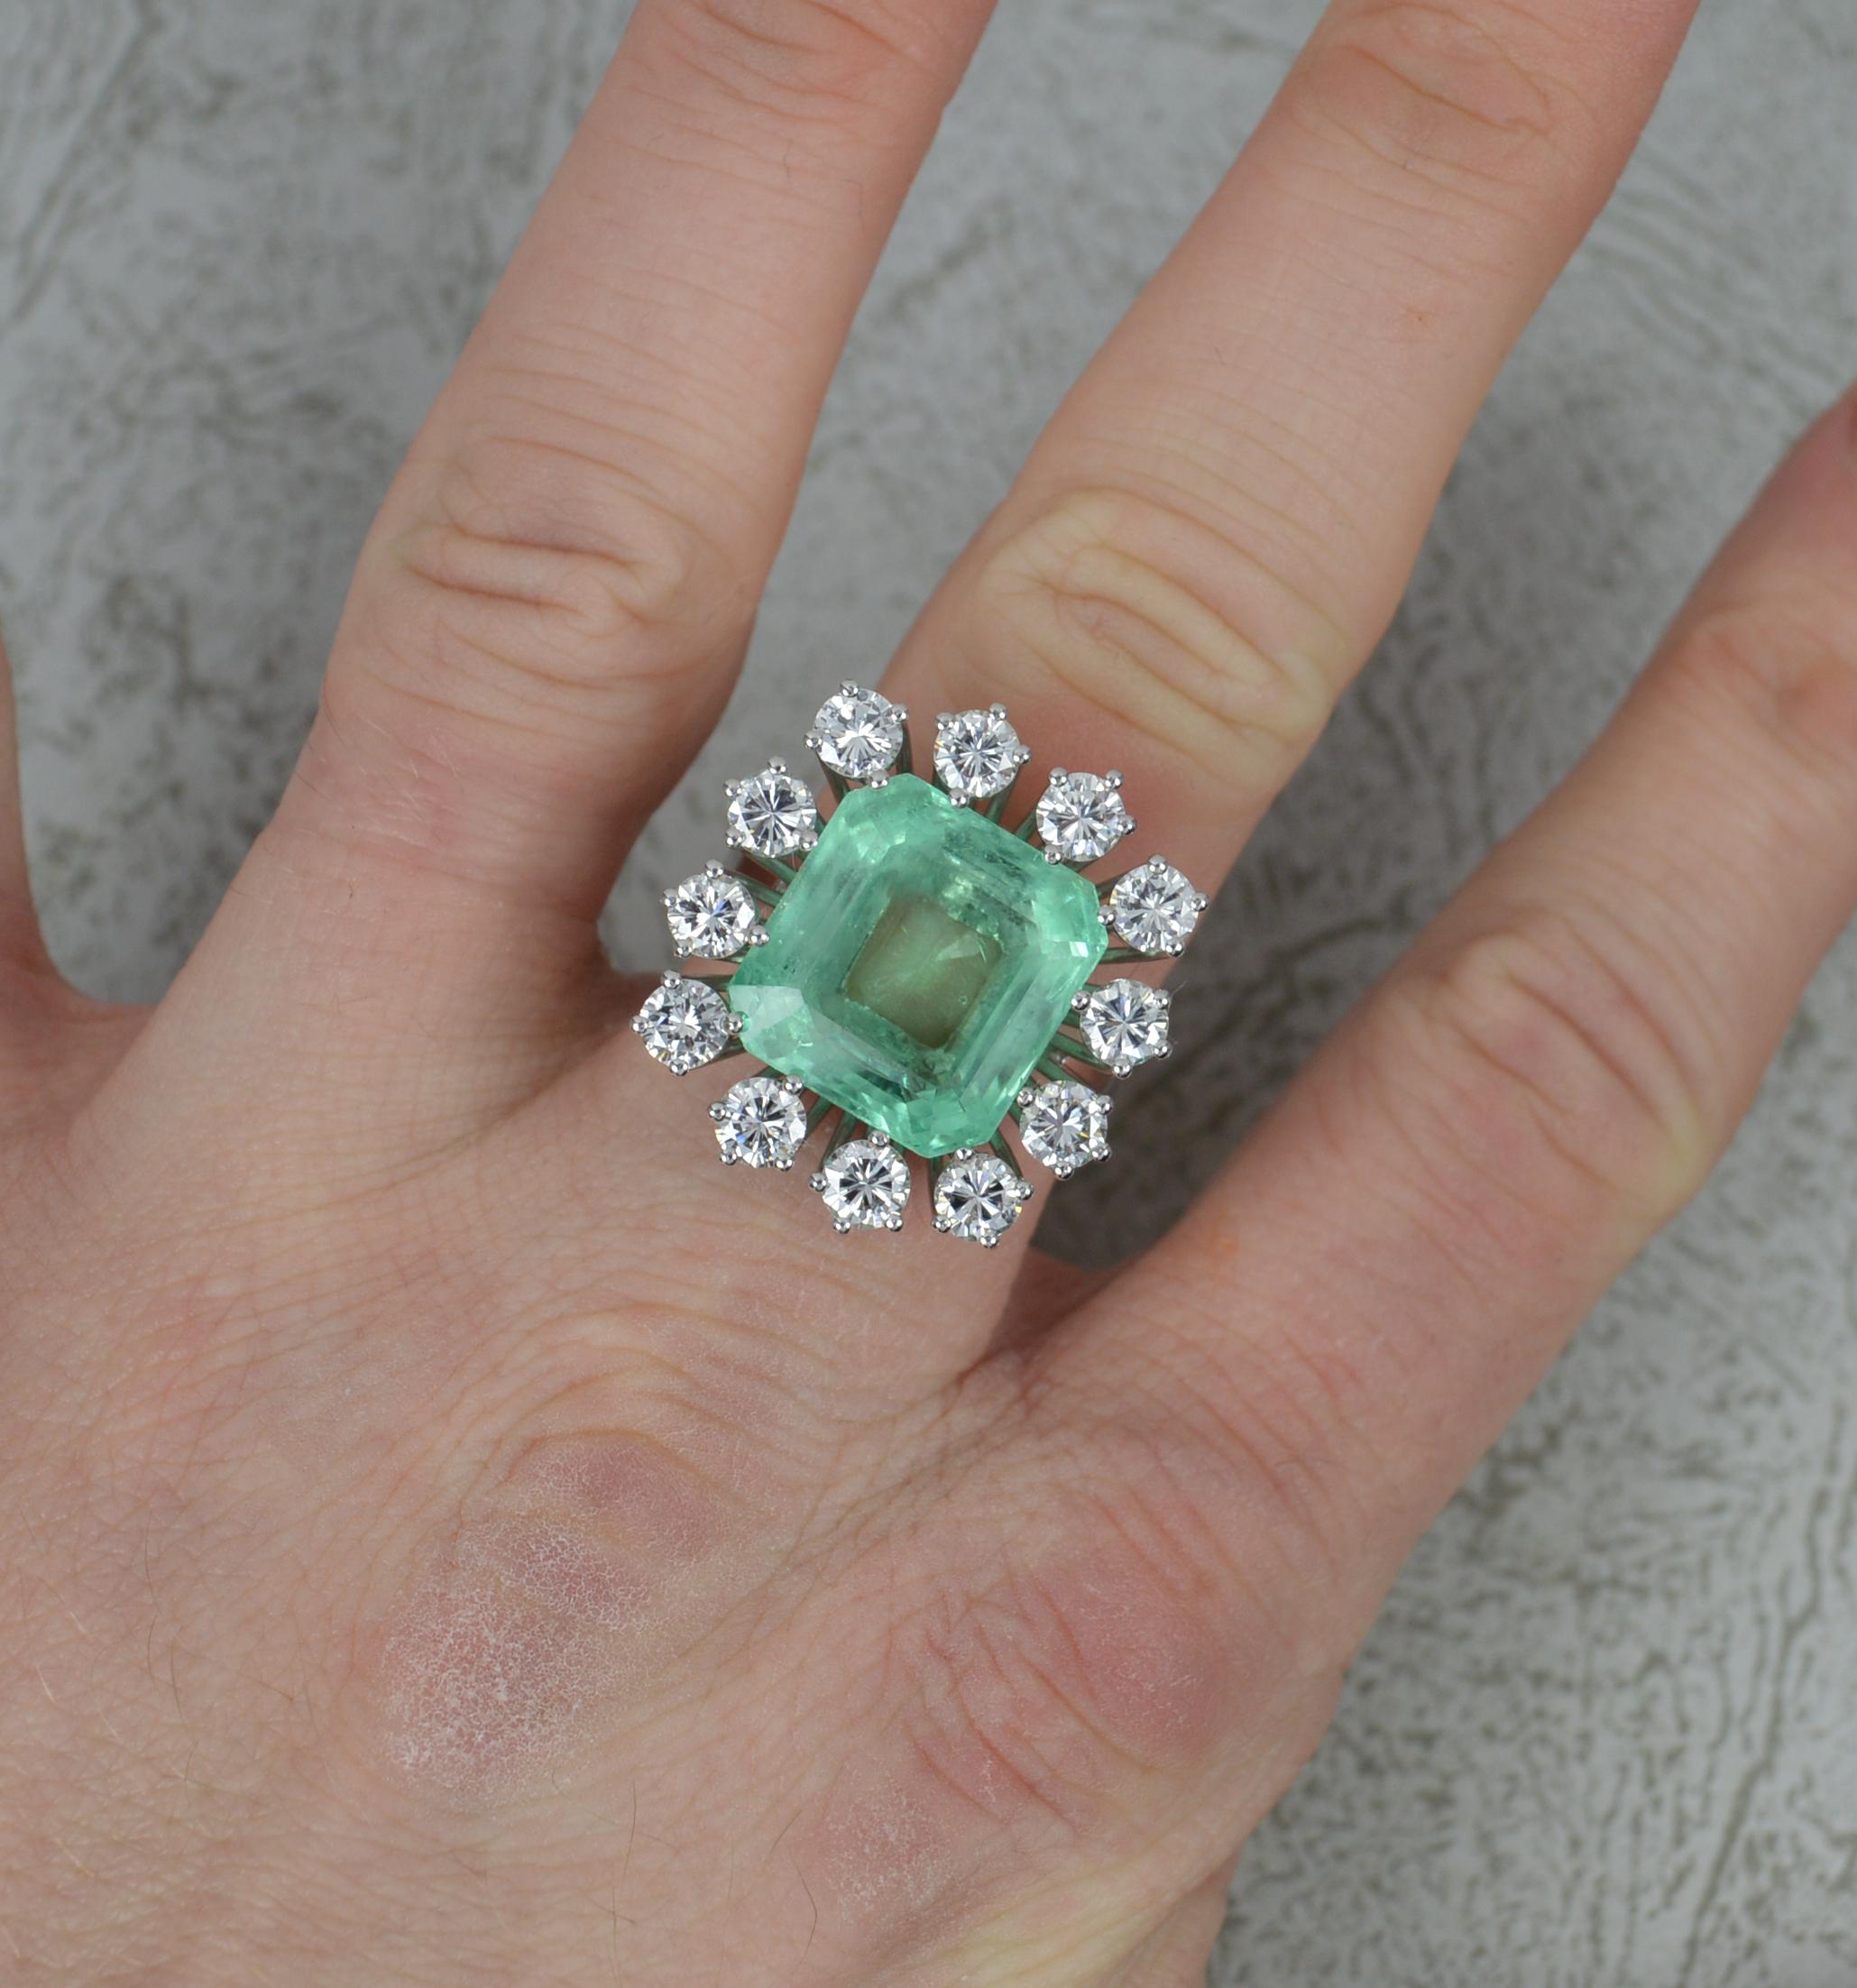 A stunning and large Emerald and Diamond cocktail ring.
Solid 18 carat white gold example.
Set with a large emerald cut emerald to centre, 12.8mm x 13.6mm x 7.5mm approx. Very clean and bright emerald. Minor inclusions only.
Surrounding are twelve